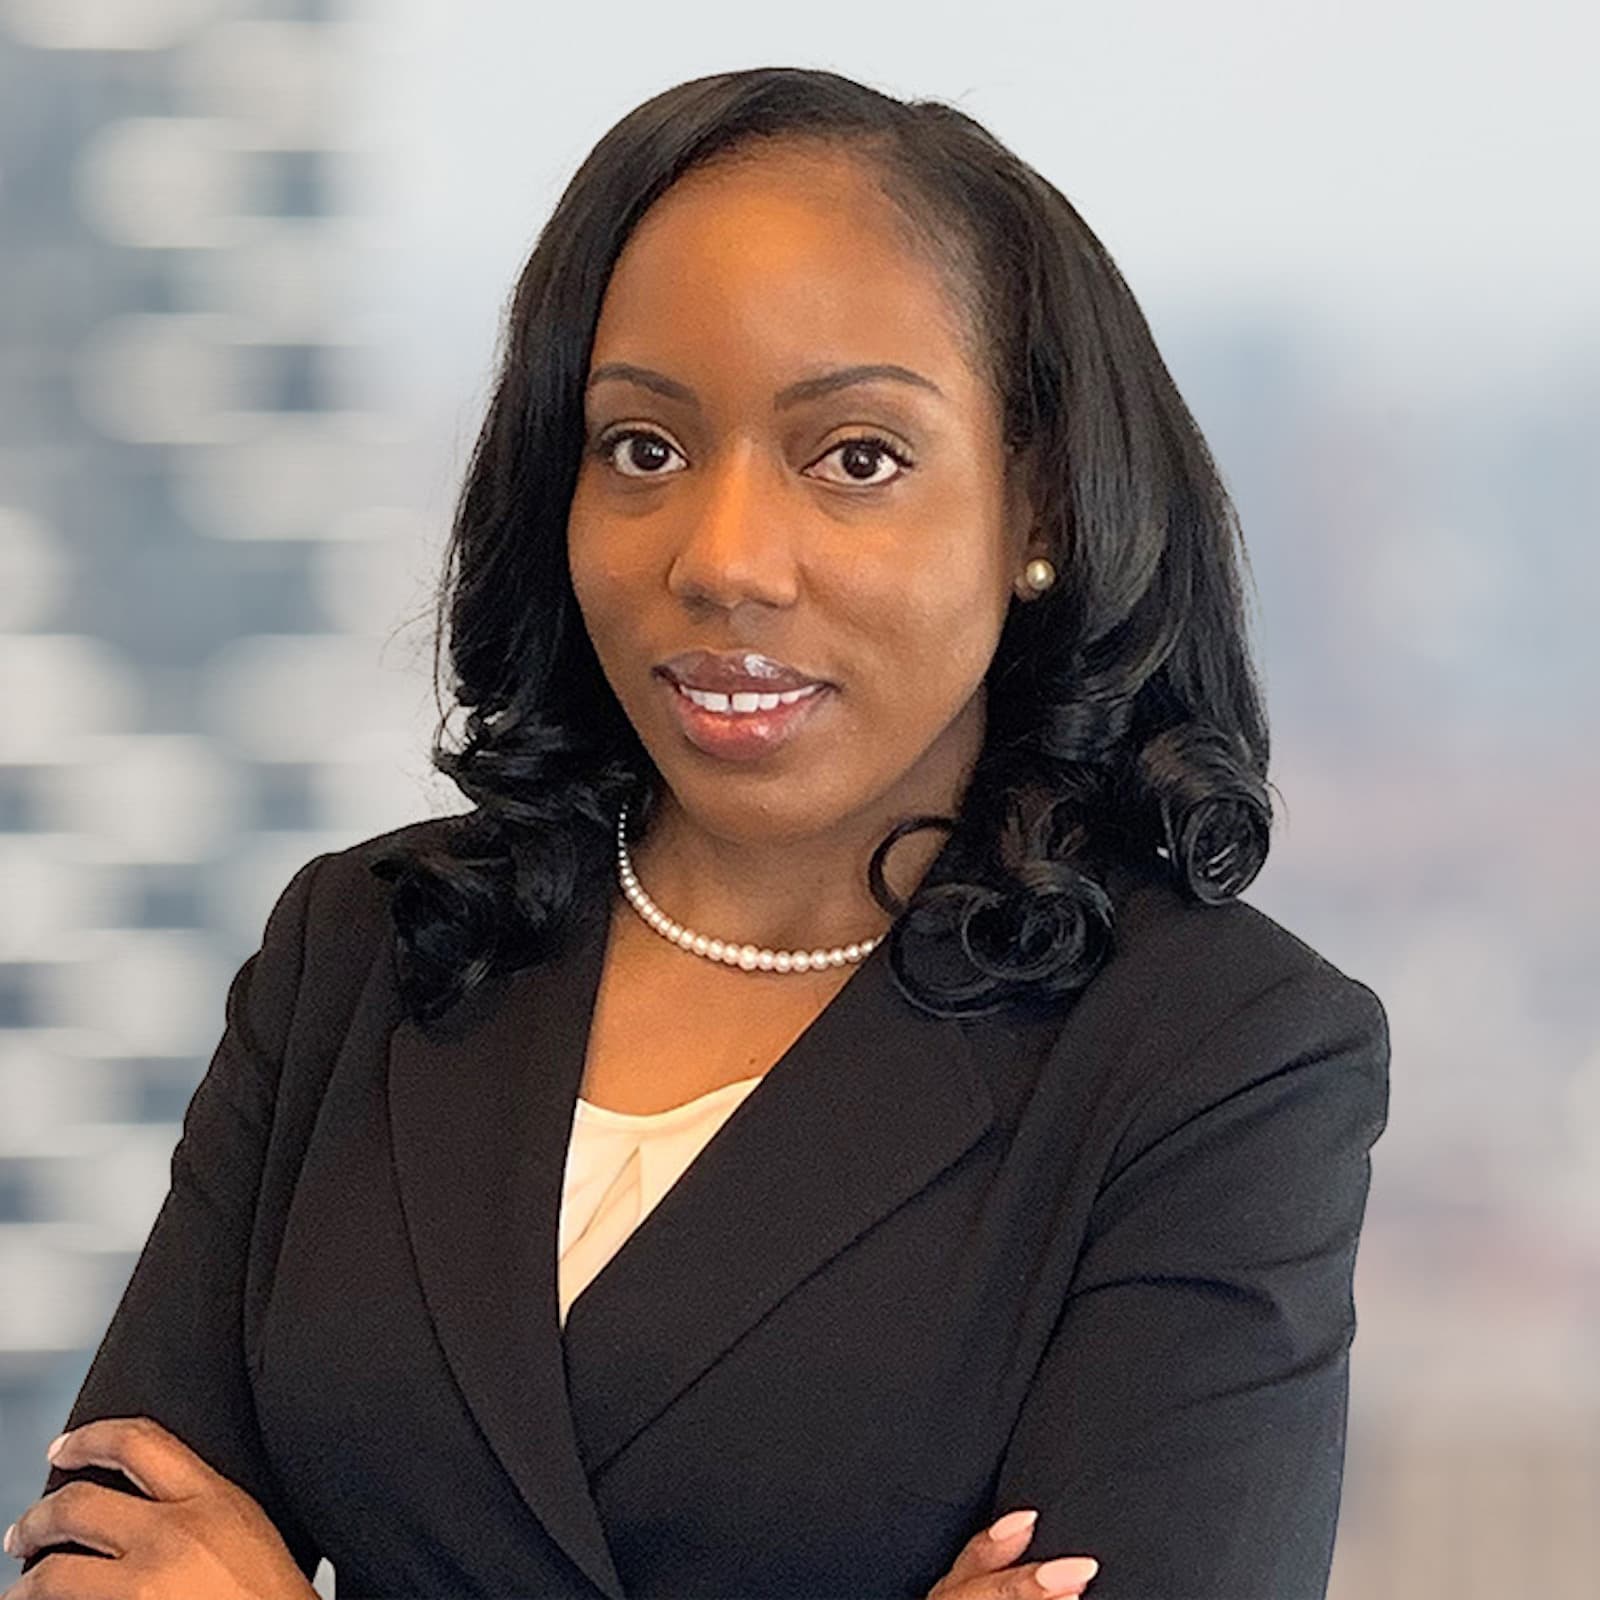 Christian Business Formation Lawyer in New York New York - Shakera Thompson